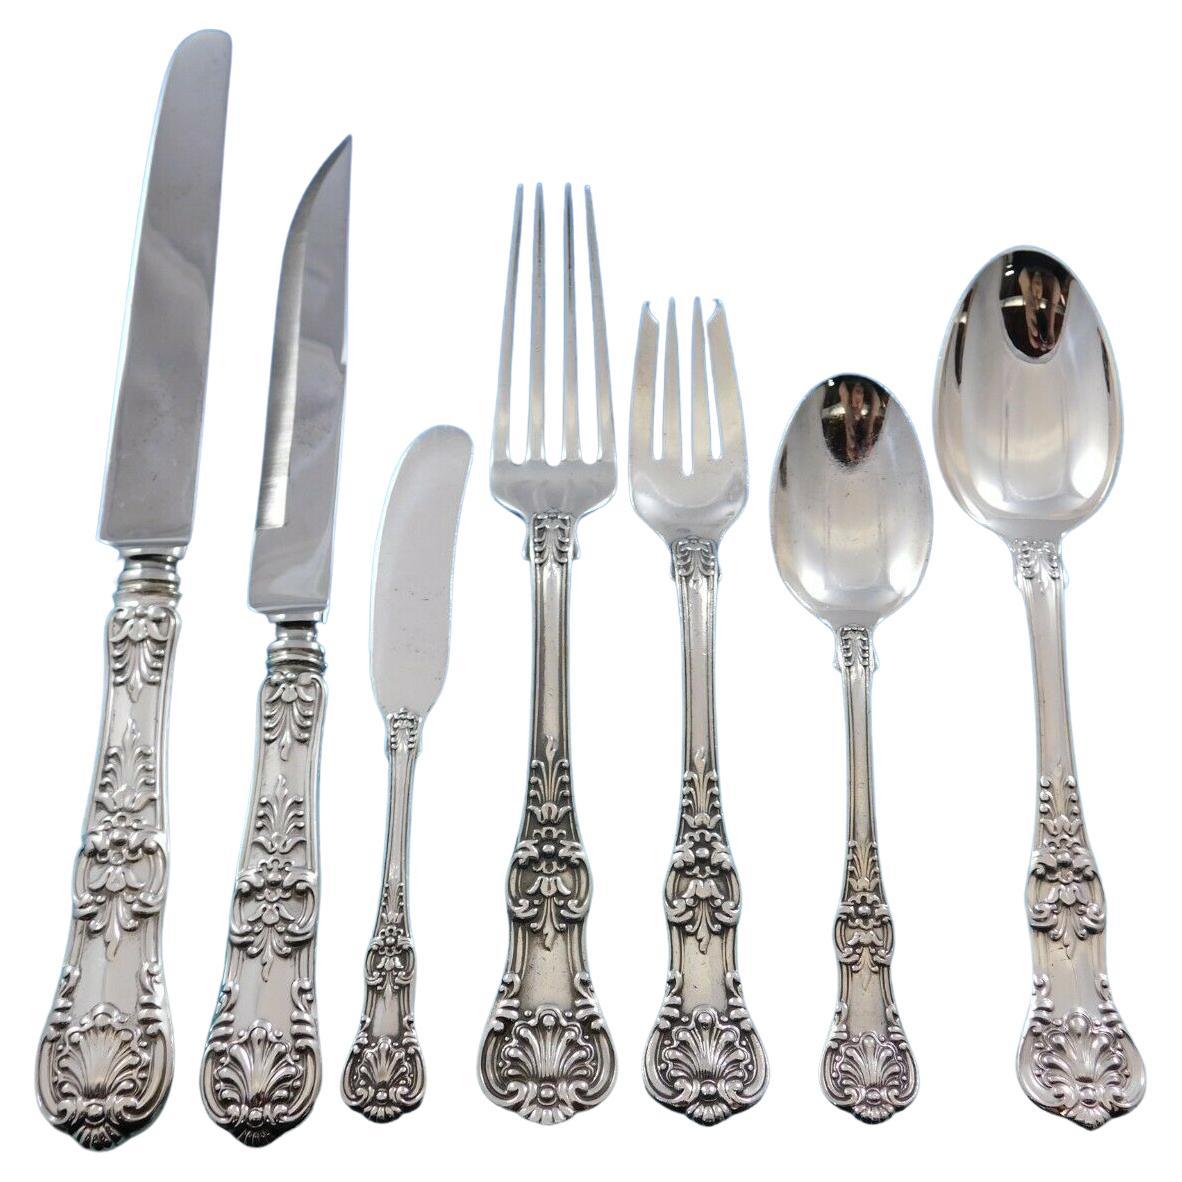 English King by Tiffany and Co Sterling Silver Flatware Set 344 Pcs Dinner